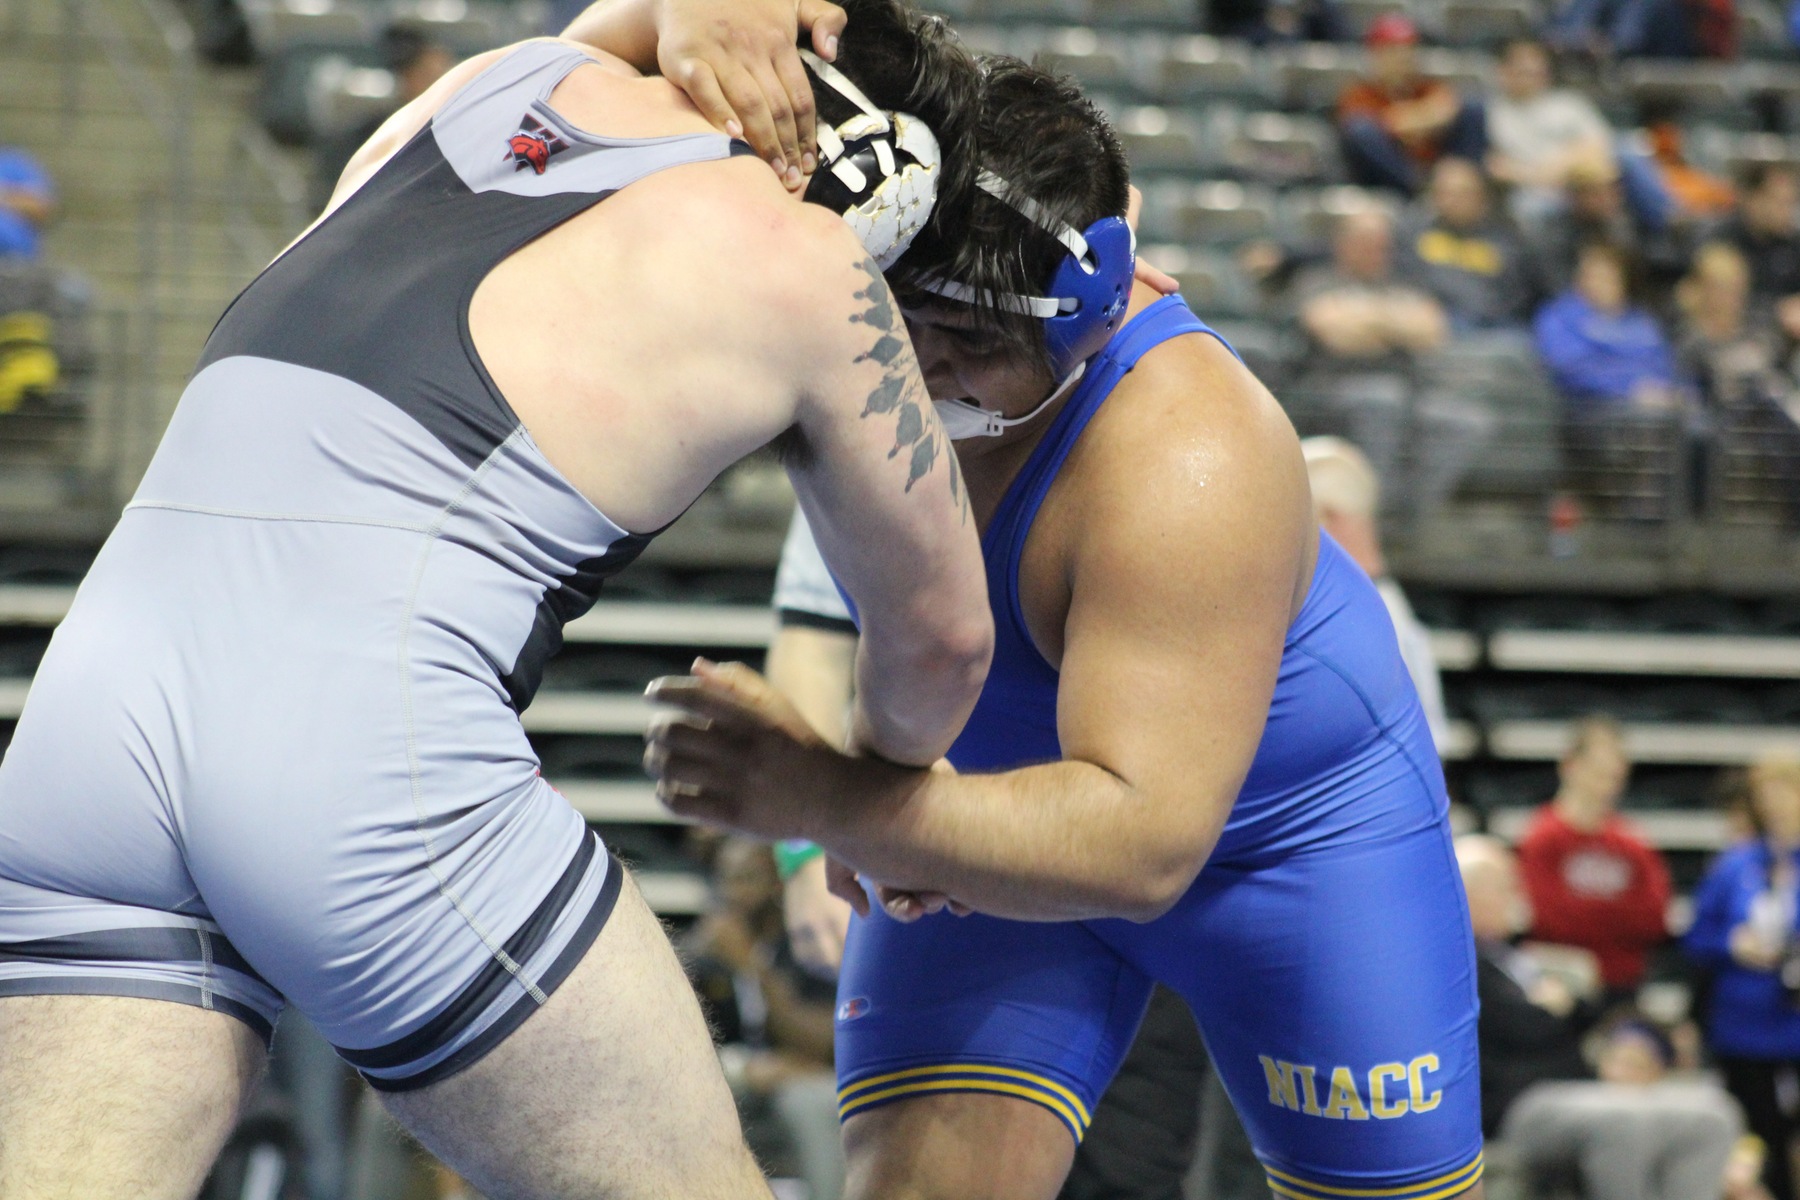 NIACC's Mario Pena battles Western Wyoming's Wade French in their first-round match at 285 pounds at the national tournament Friday.